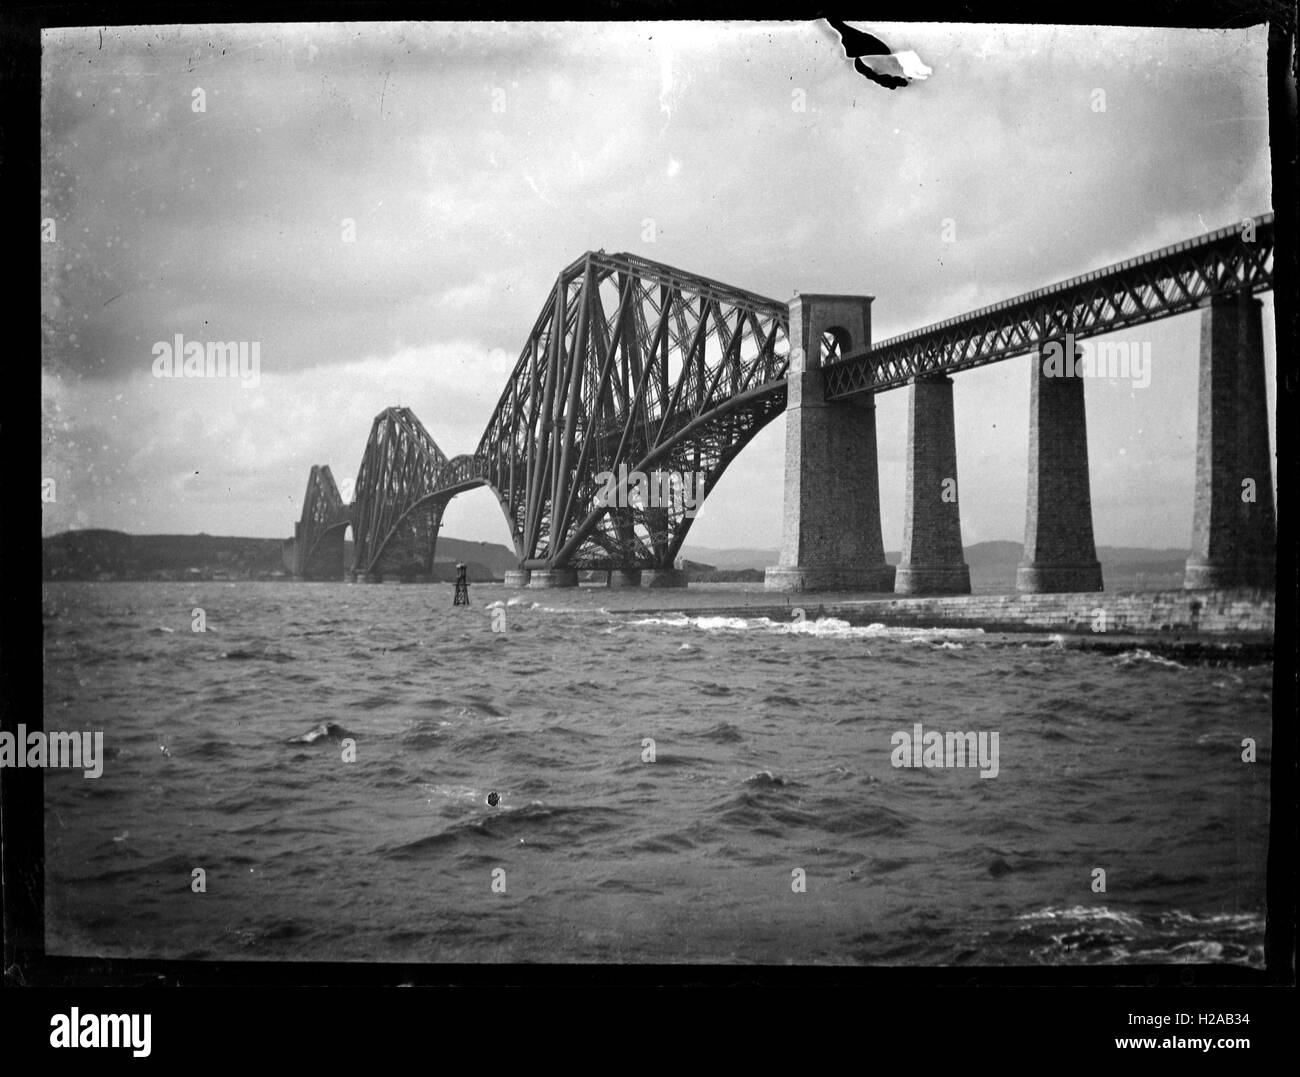 Photograph showing The Forth Bridge (Forth Rail Bridge) across the Firth of Forth in Scotland c1896. A cantilever railway bridge, it was originally opened in 1890 . Unpublished image by George Alfred Haden - Haden Best (1839-1921) of Haden Hill House, Cradley Heath, Near Halesowen. George Alfred inherited Haden Hall in 1877 and was an independently wealthy man and an early photography enthusiast who travelled widely throughout the UK in the 1890's with his two adopted daughters, local girls Emily Bryant and Alice Cockin. Photo by George Alfred Haden / UK Editions Stock Photo